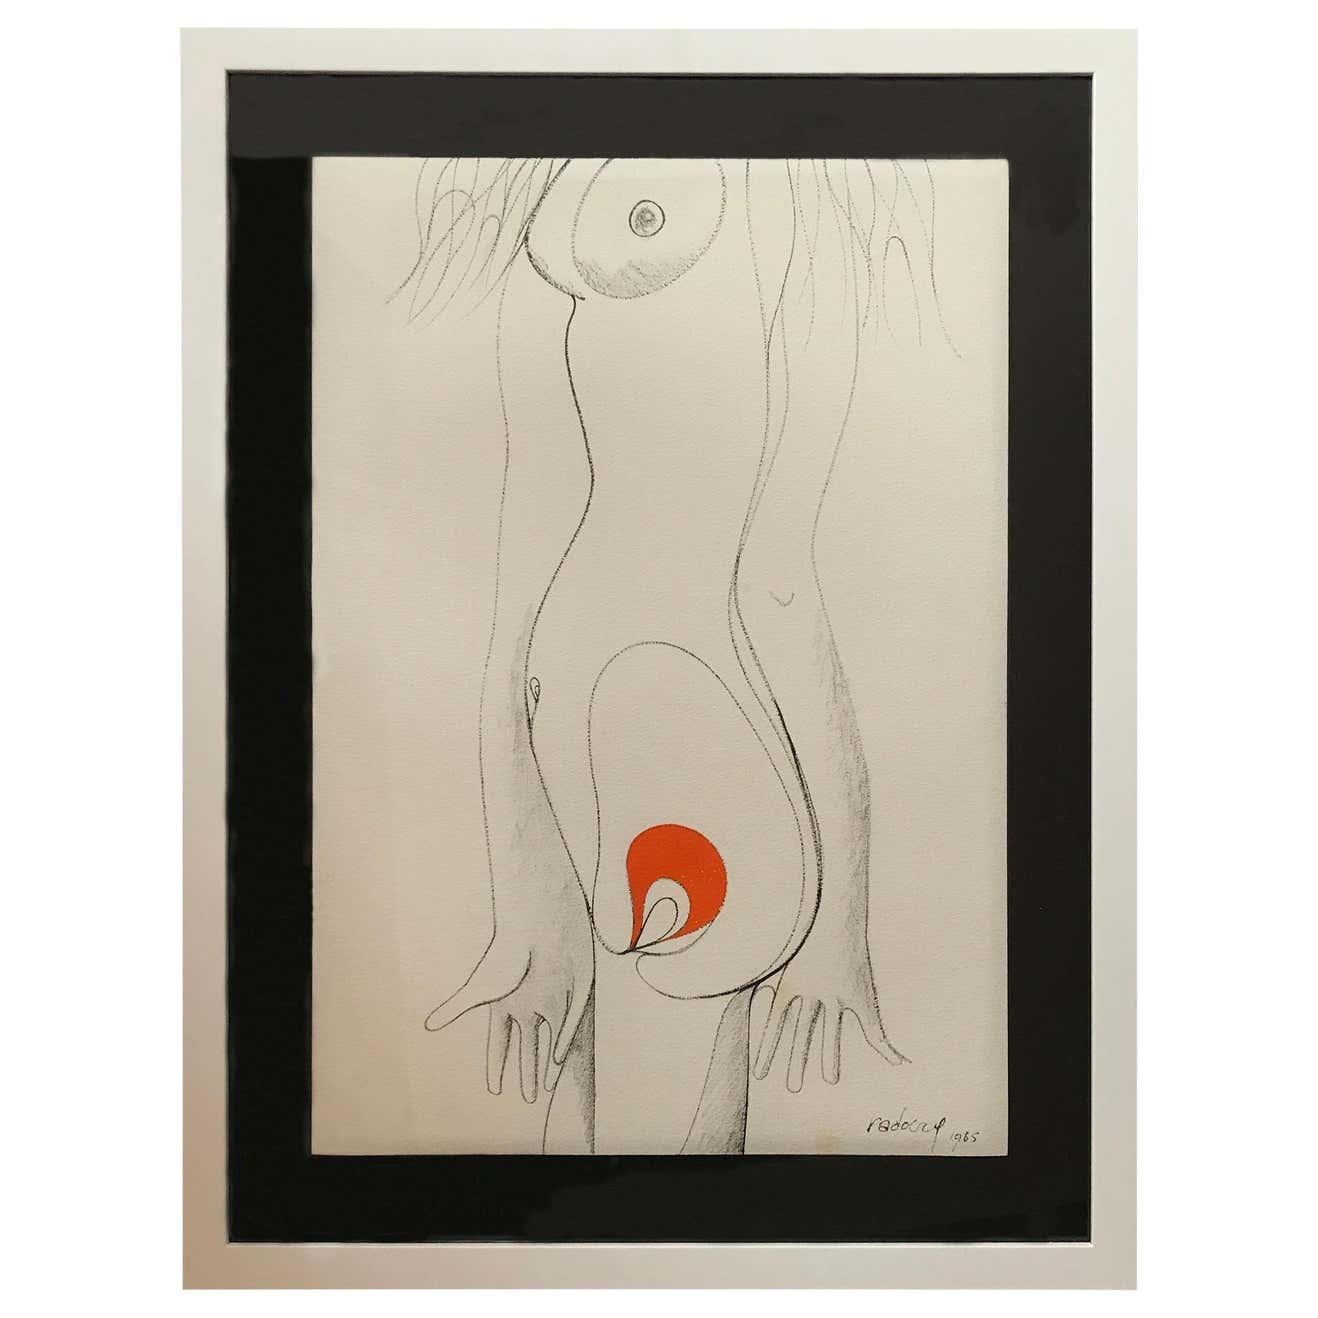 A nude drawing and gouache highlighting the pregnancy mystery. Signed Radoczy, 1965.

Albert Radoczy was a painter from the NY Tristate area, most notably in the 1960s and 1970s. Radoczy was a master at exploring the female form. Throughout his